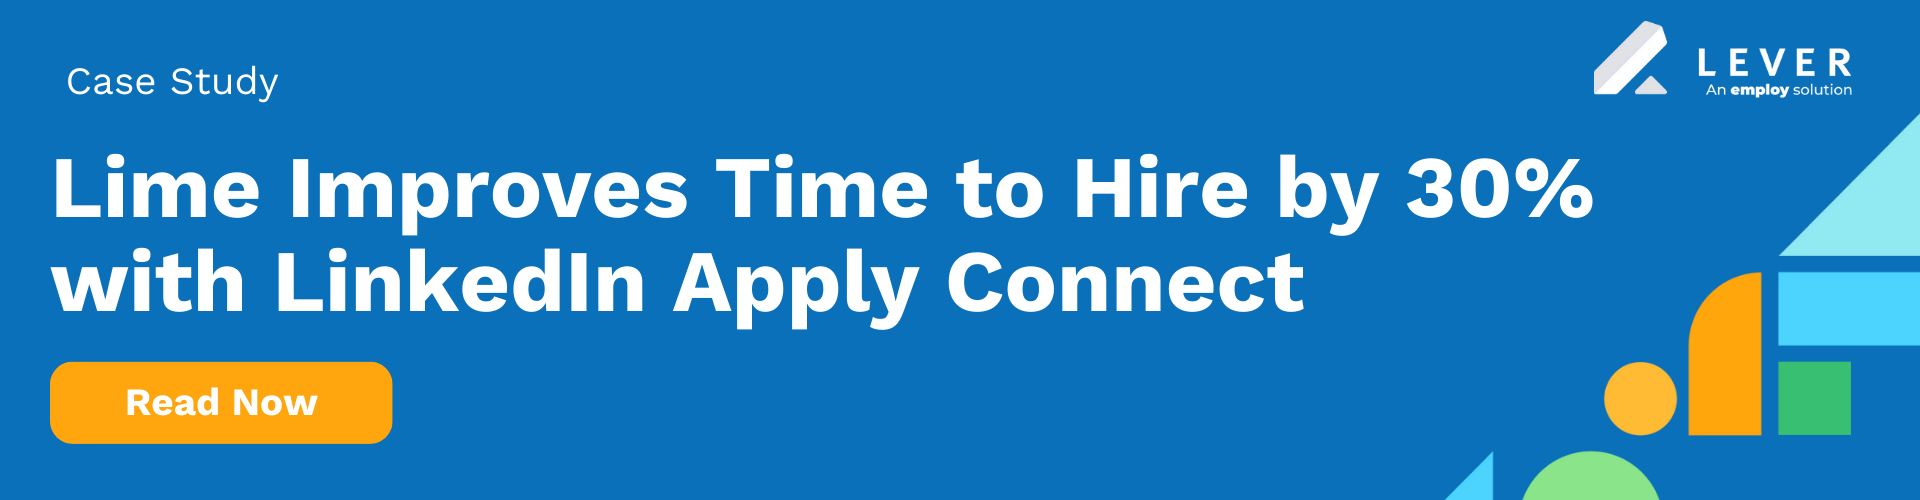 Lime improves time to hire by 30% with LinkedIn Apply Connect